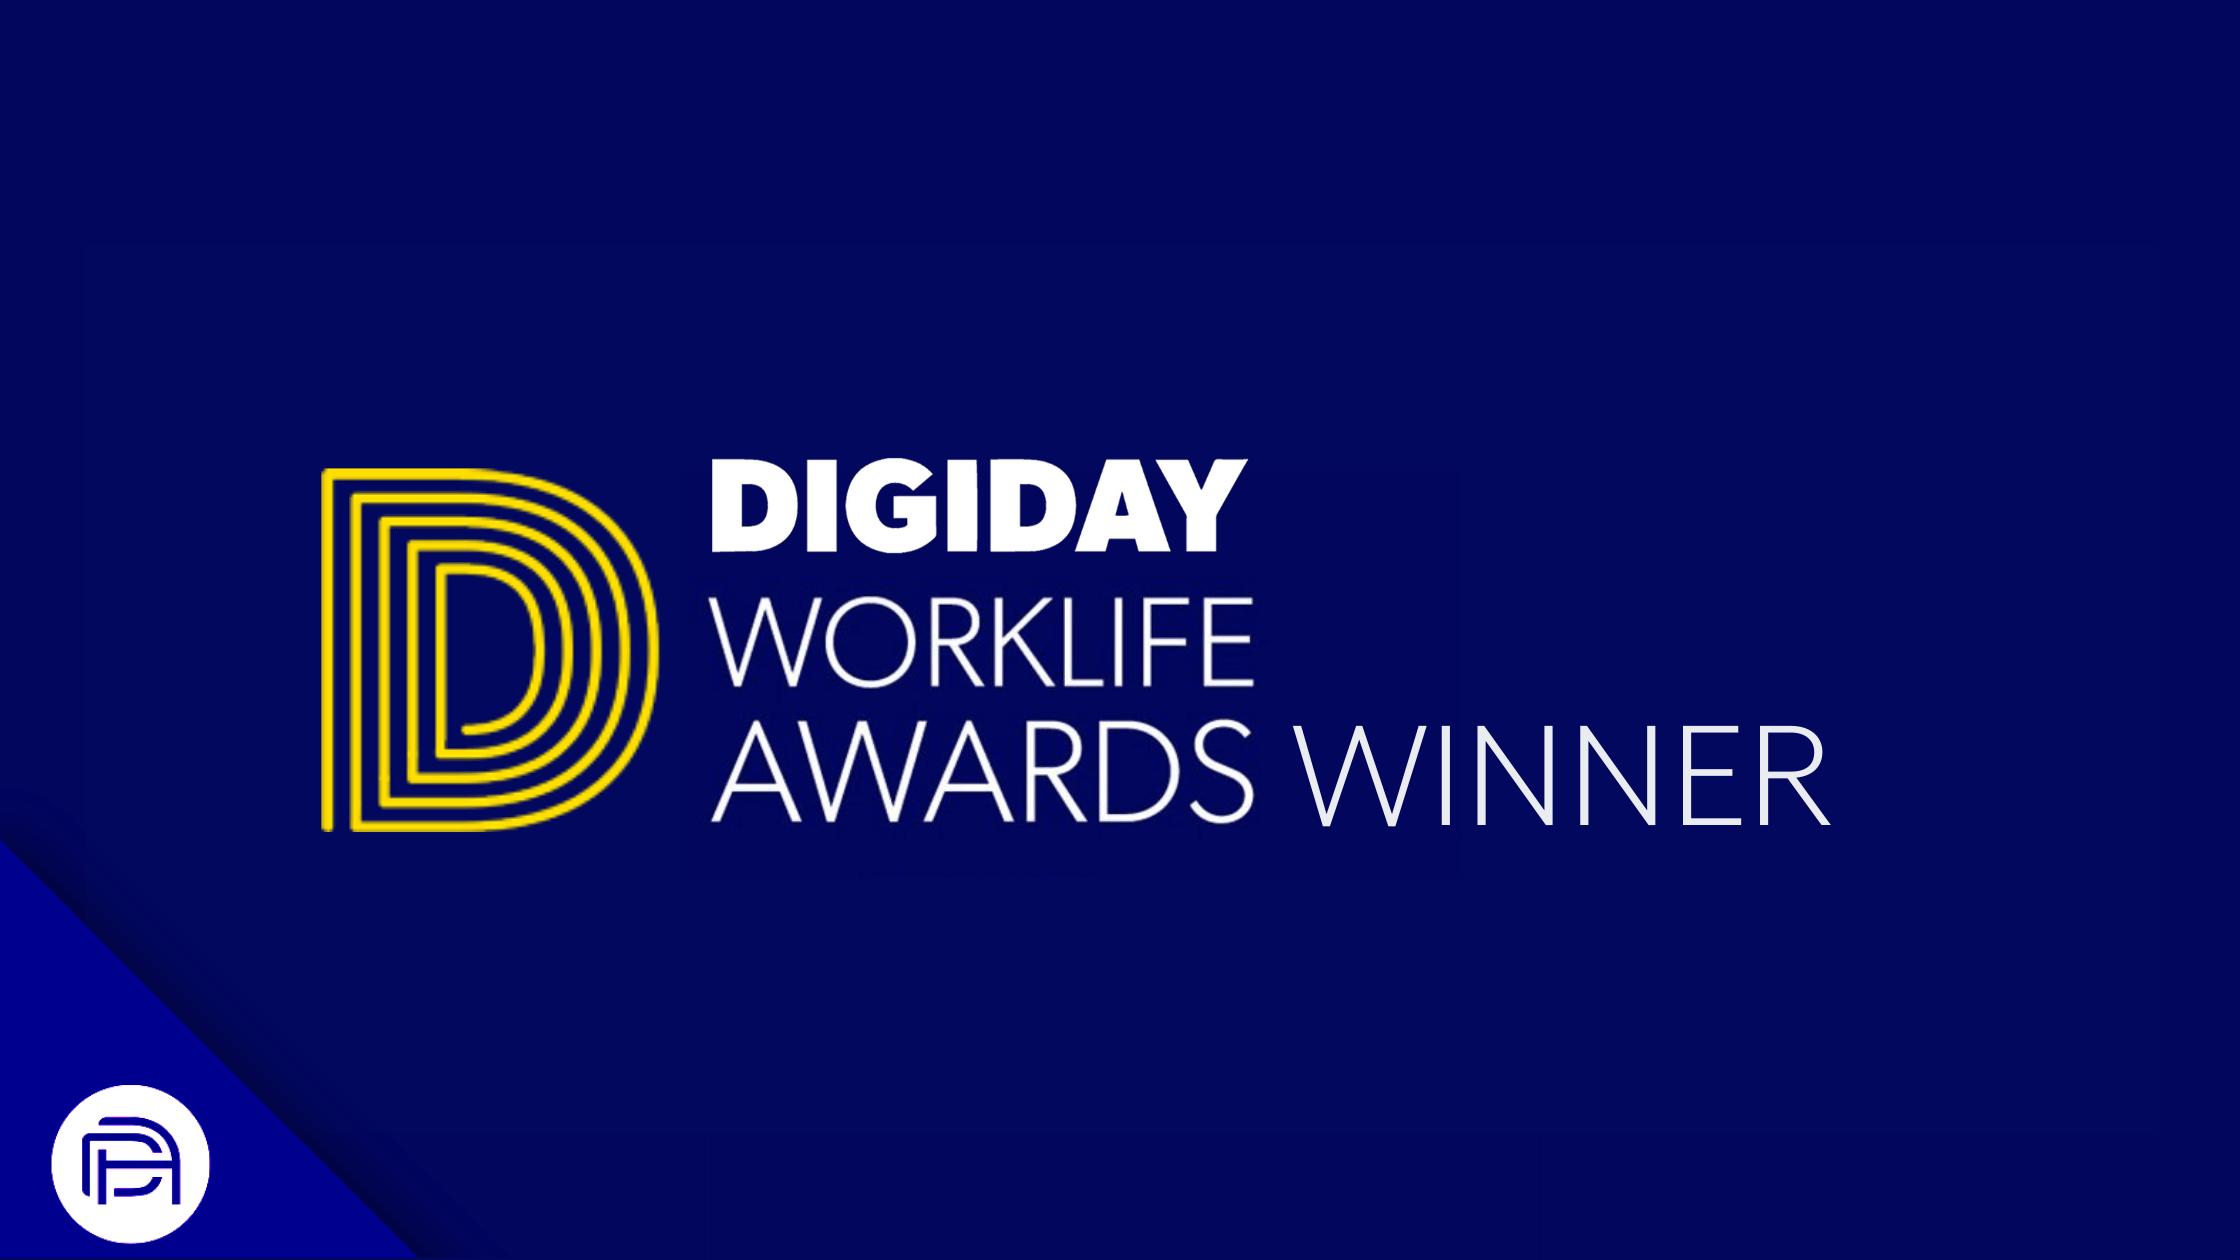 Direct Agents Wins Digiday Worklife Award for “Best Employer for Young Careers”